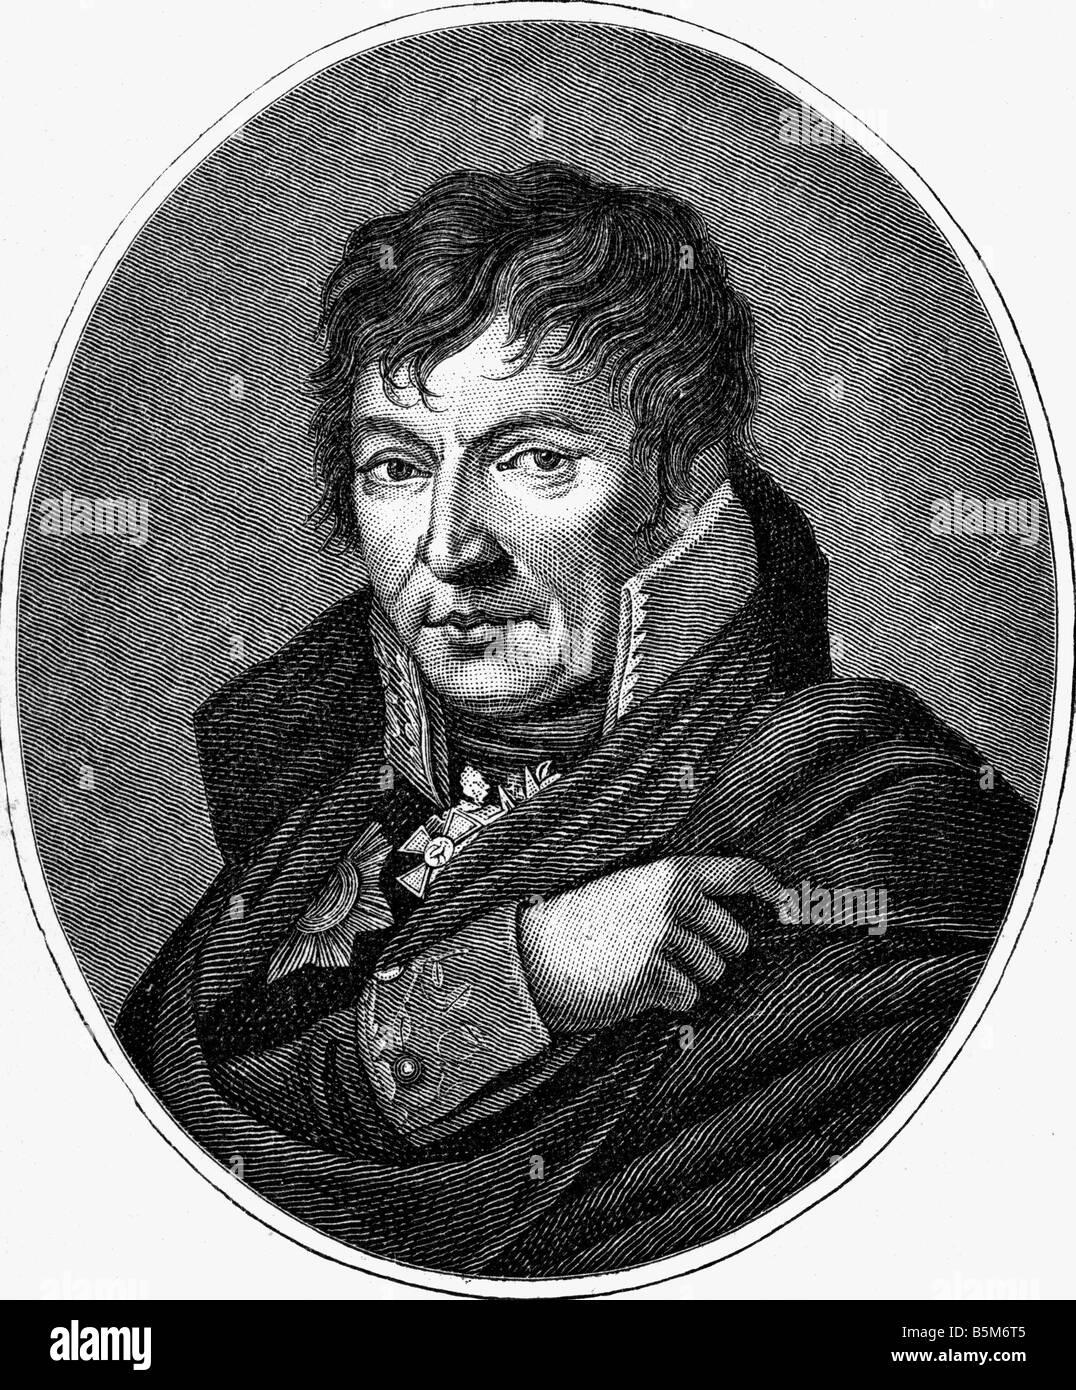 Scharnhorst, Gerhard von, 12.11 1755 - 28.6.1813, Prussian general, portrait, copper engraving by Friedrich Wilhelm Bollinger, 19th century, , Artist's Copyright has not to be cleared Stock Photo